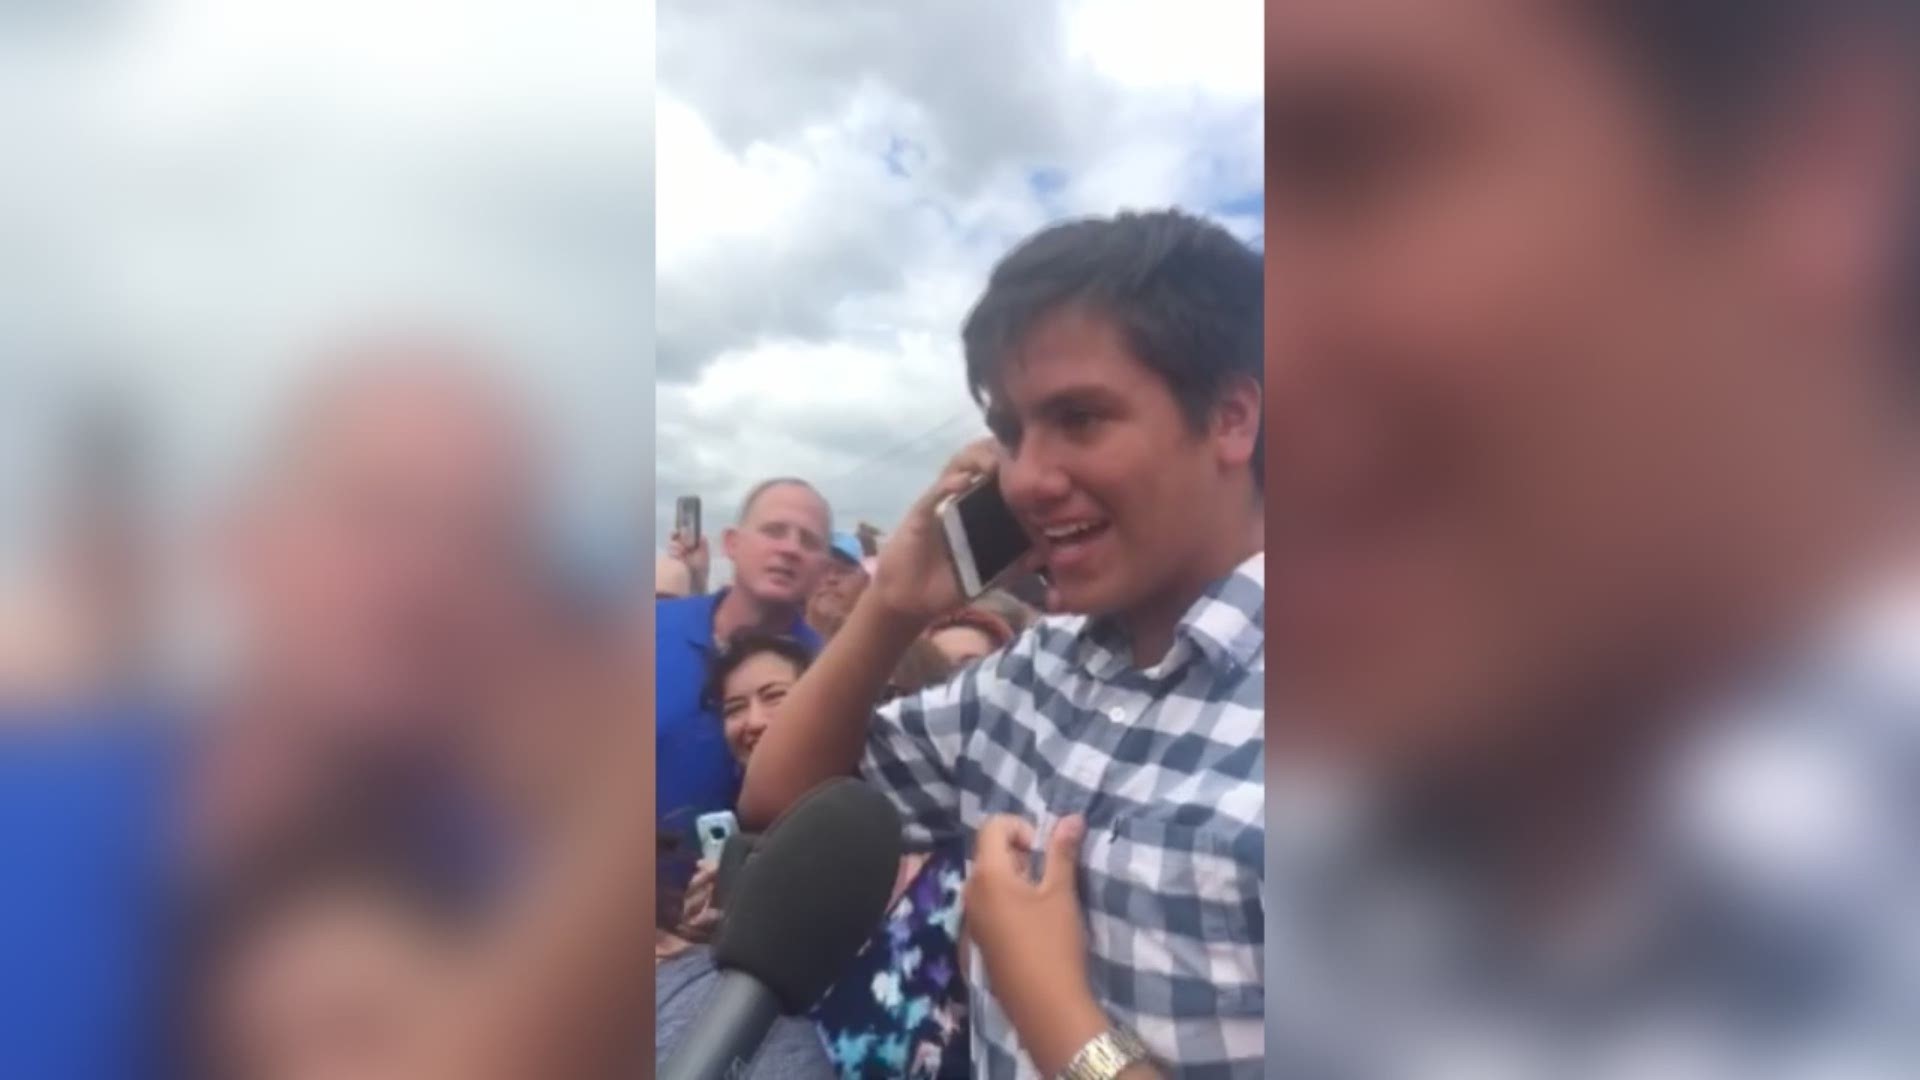 A young man was overcome with excitement as President Donald Trump took the flag he was holding and waved it in front of a crowd gathered outside the Annaville Volunteer Fire Department station Tuesday.